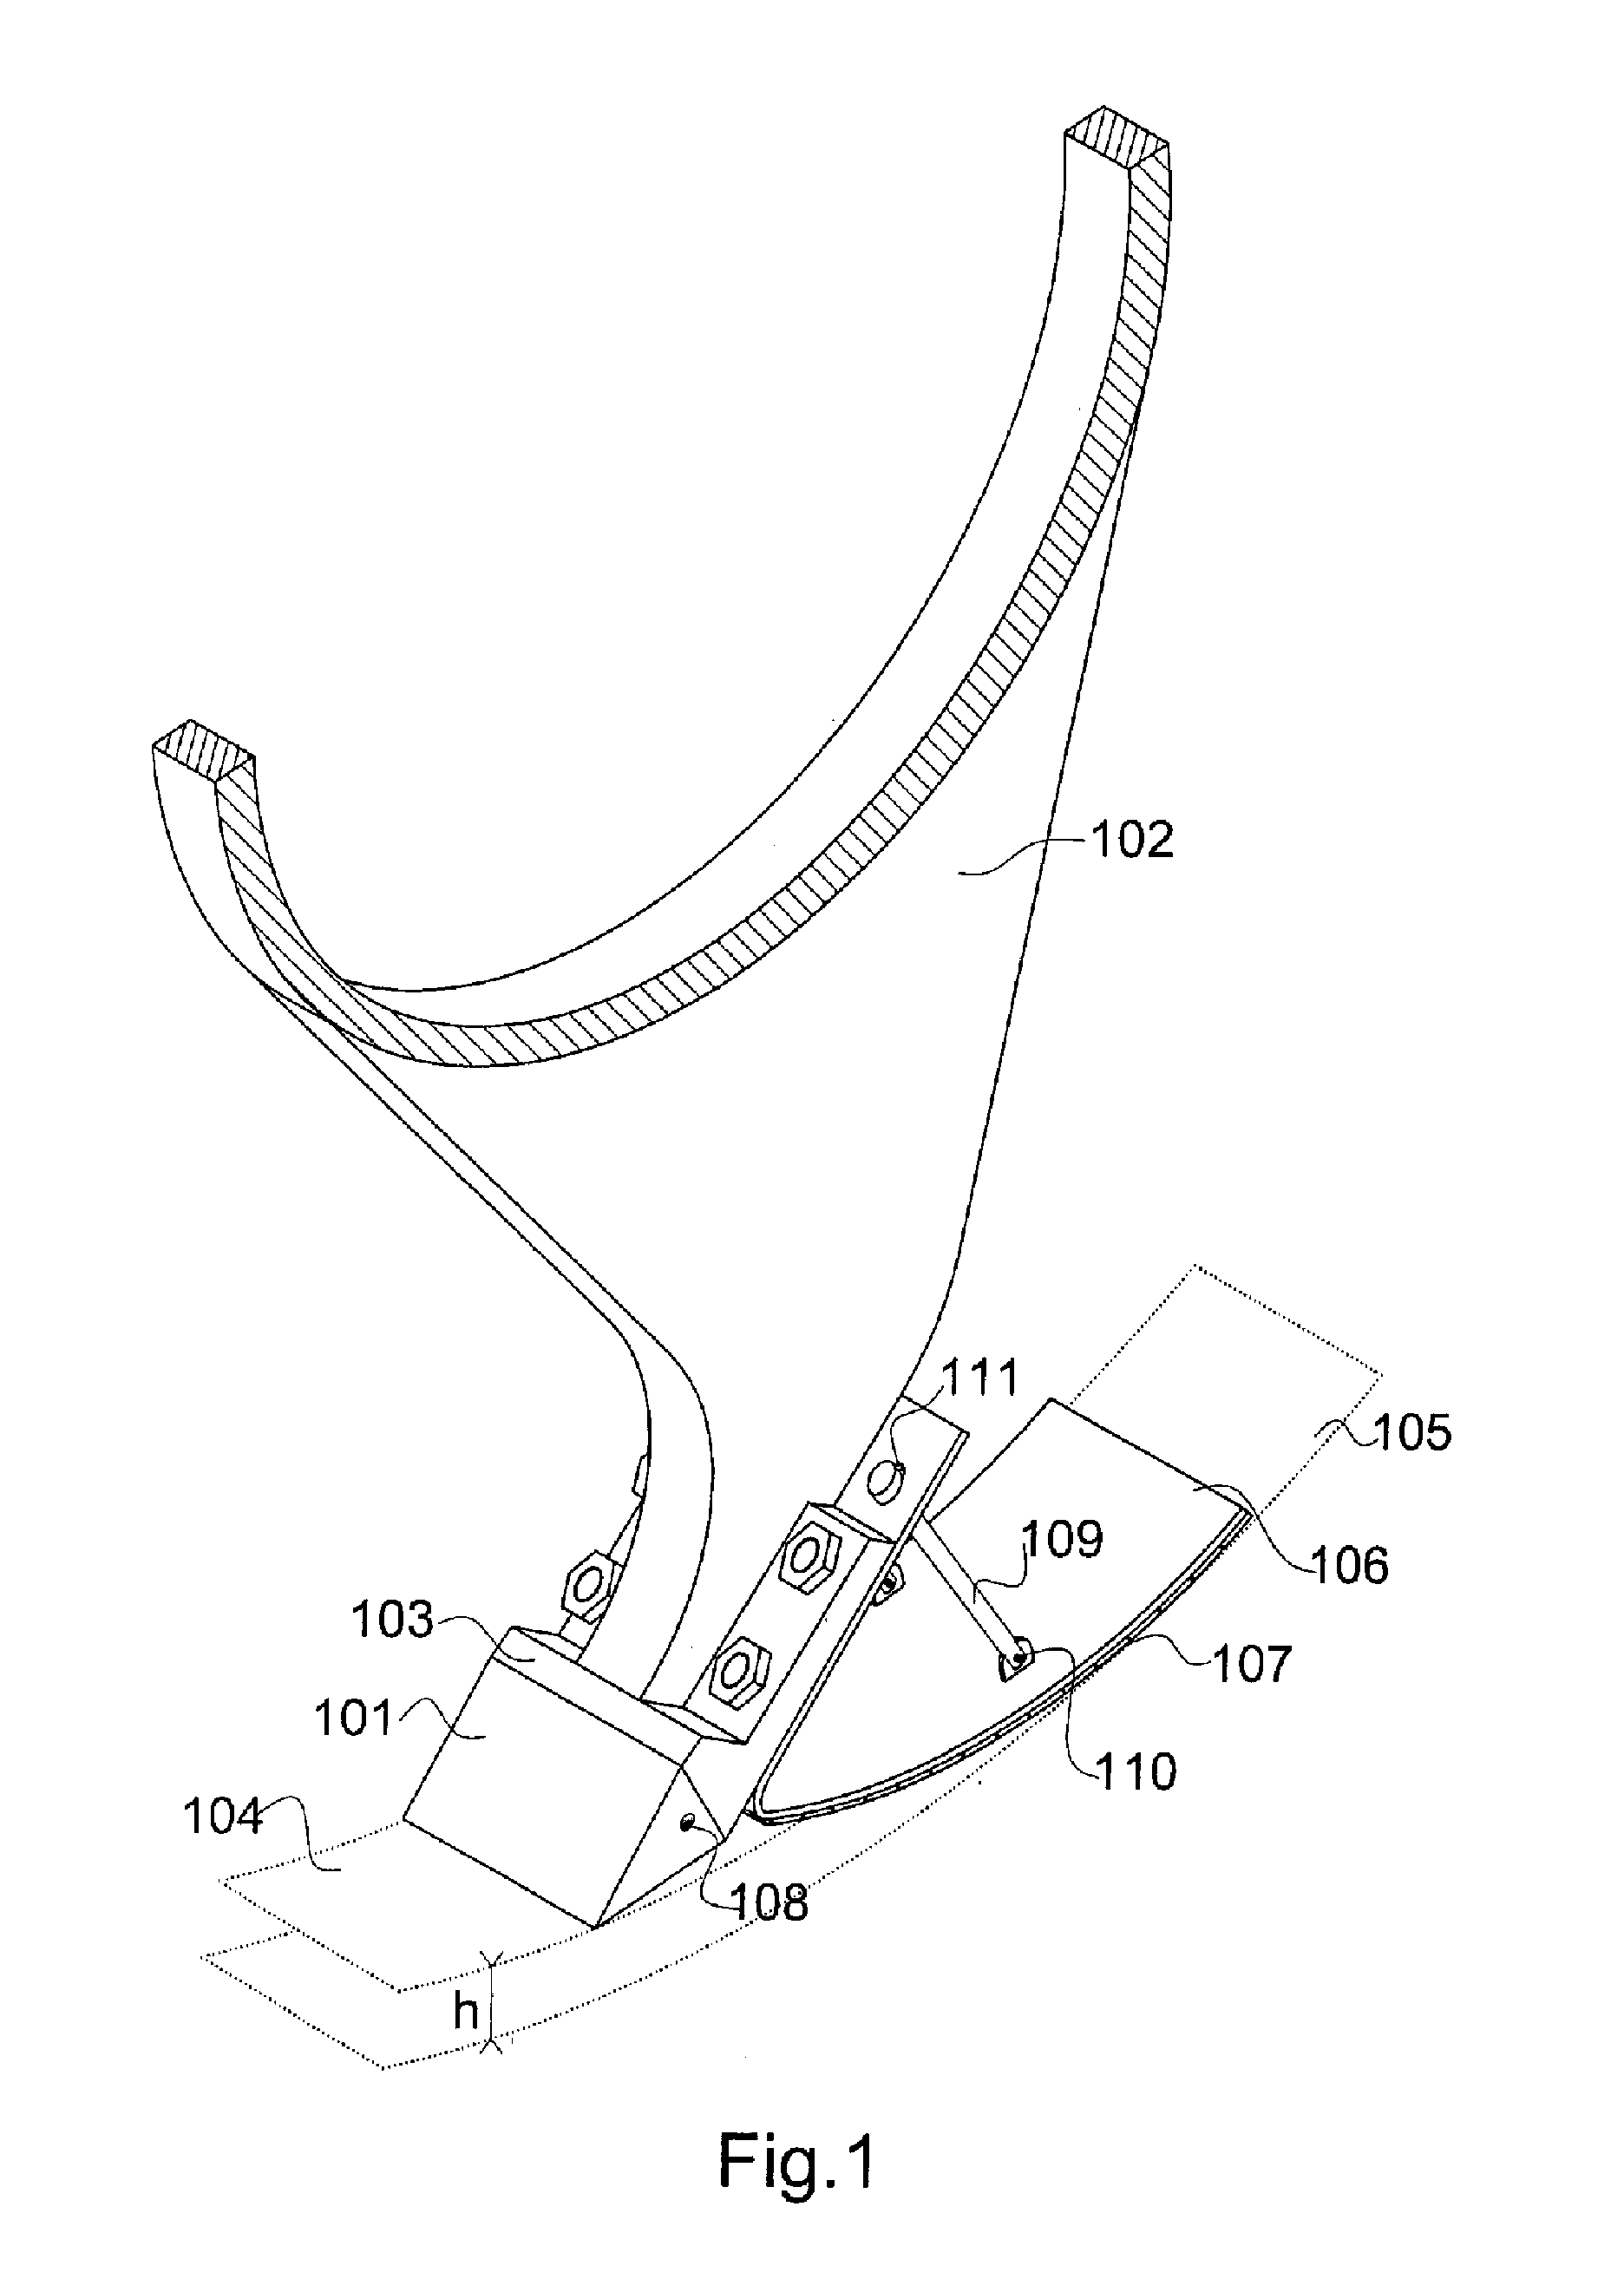 Method for compacting soil, applications of this method and devices for its implementation